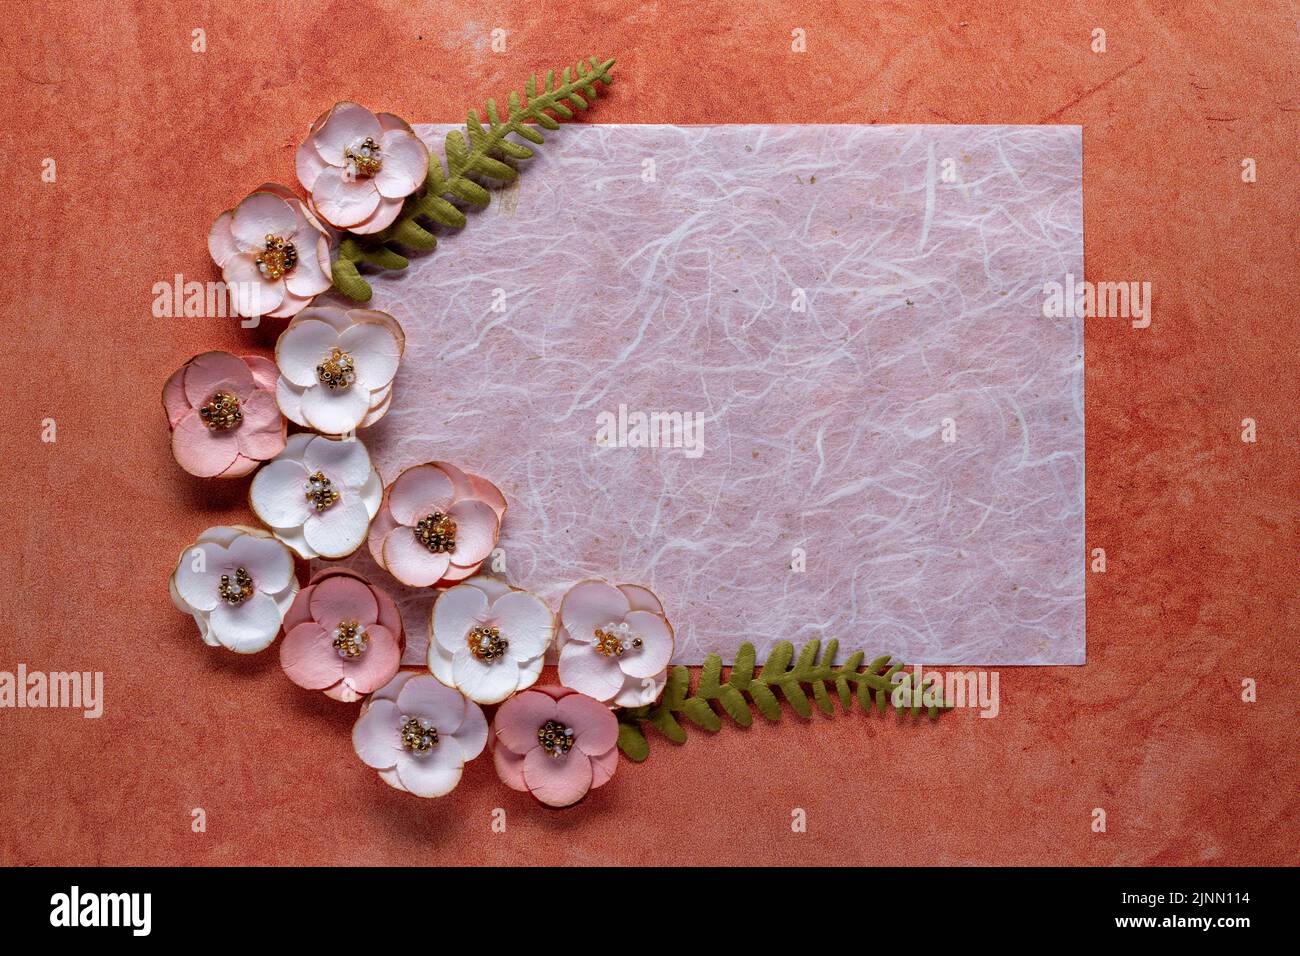 fiber paper and paper flowers on textured orange background Stock Photo